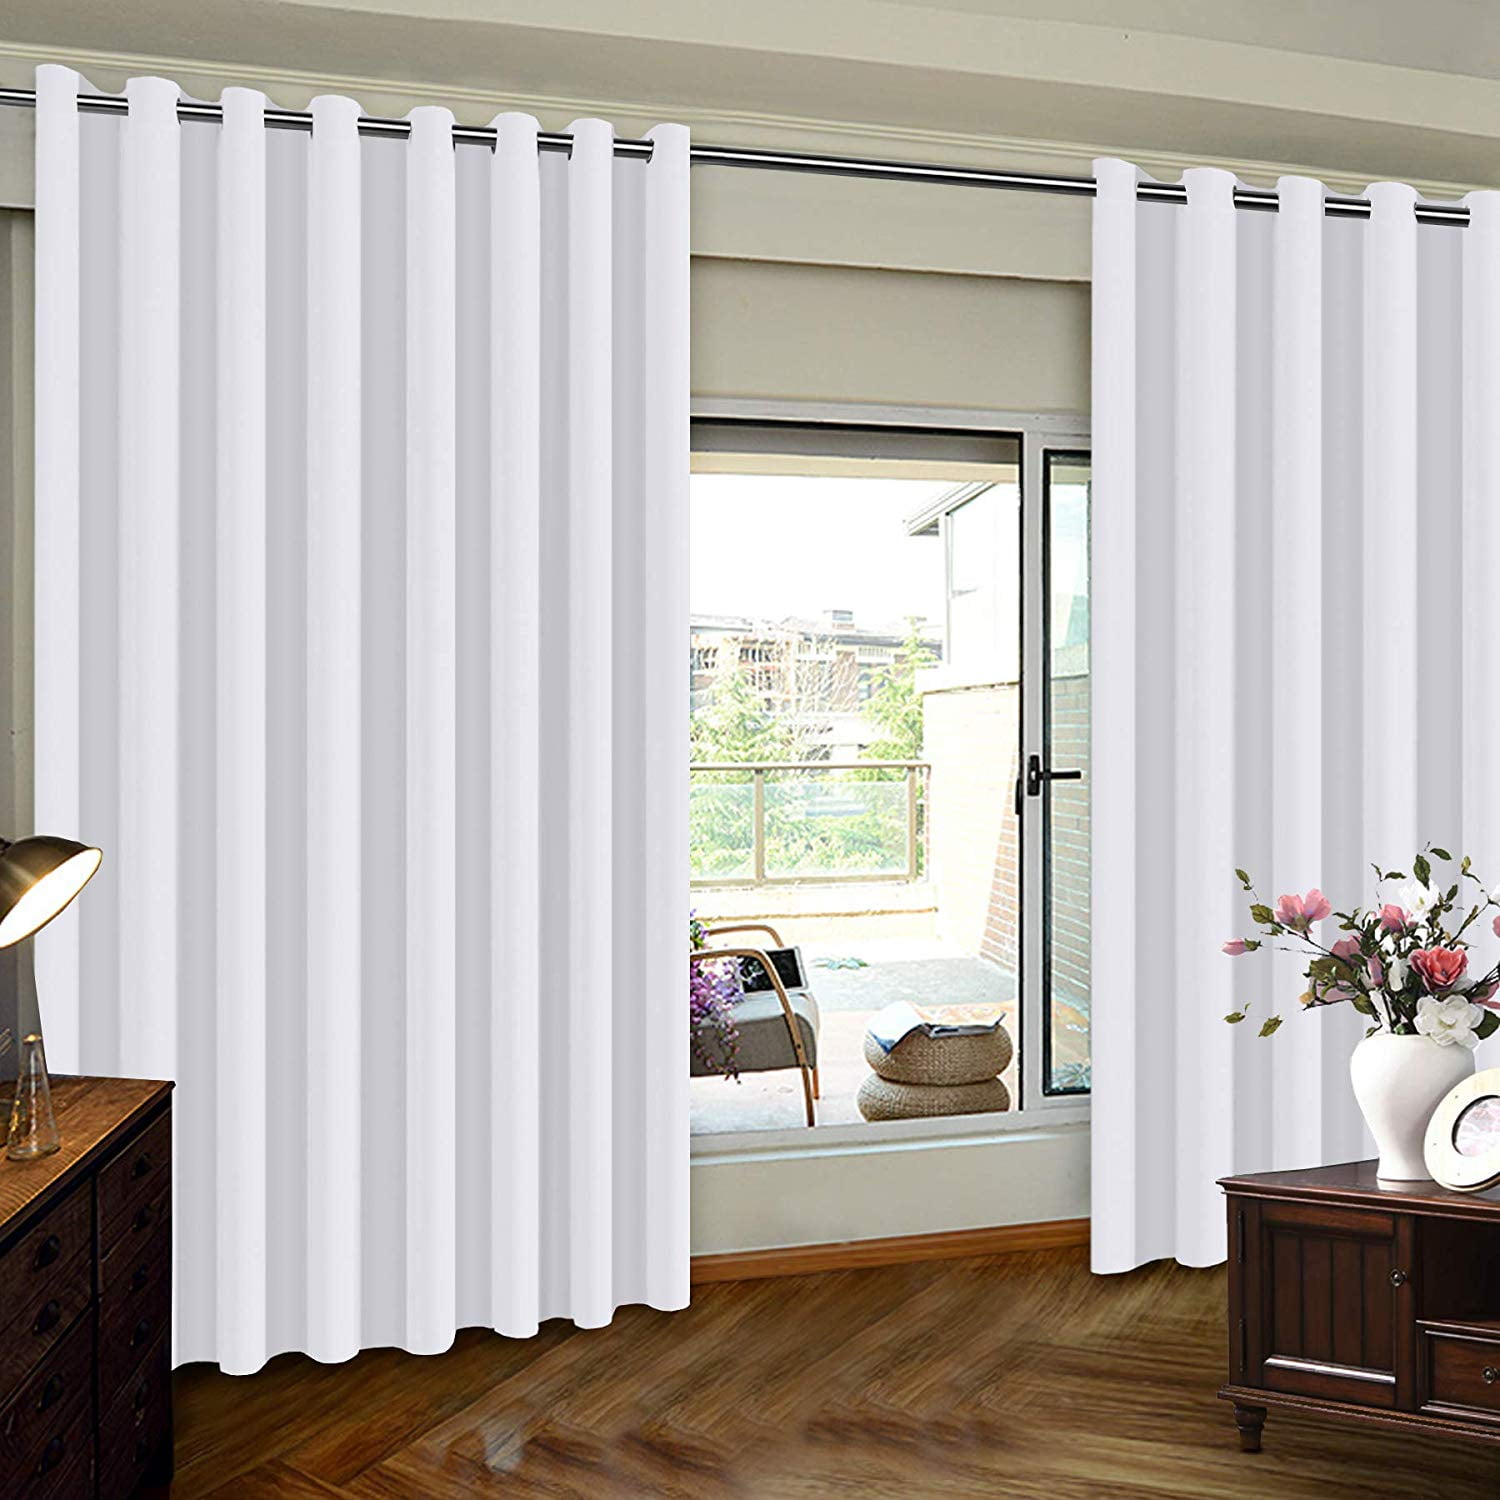 Blackout Patio Curtains Extra Long Wider Thermal Insulated Panel Room Divider 